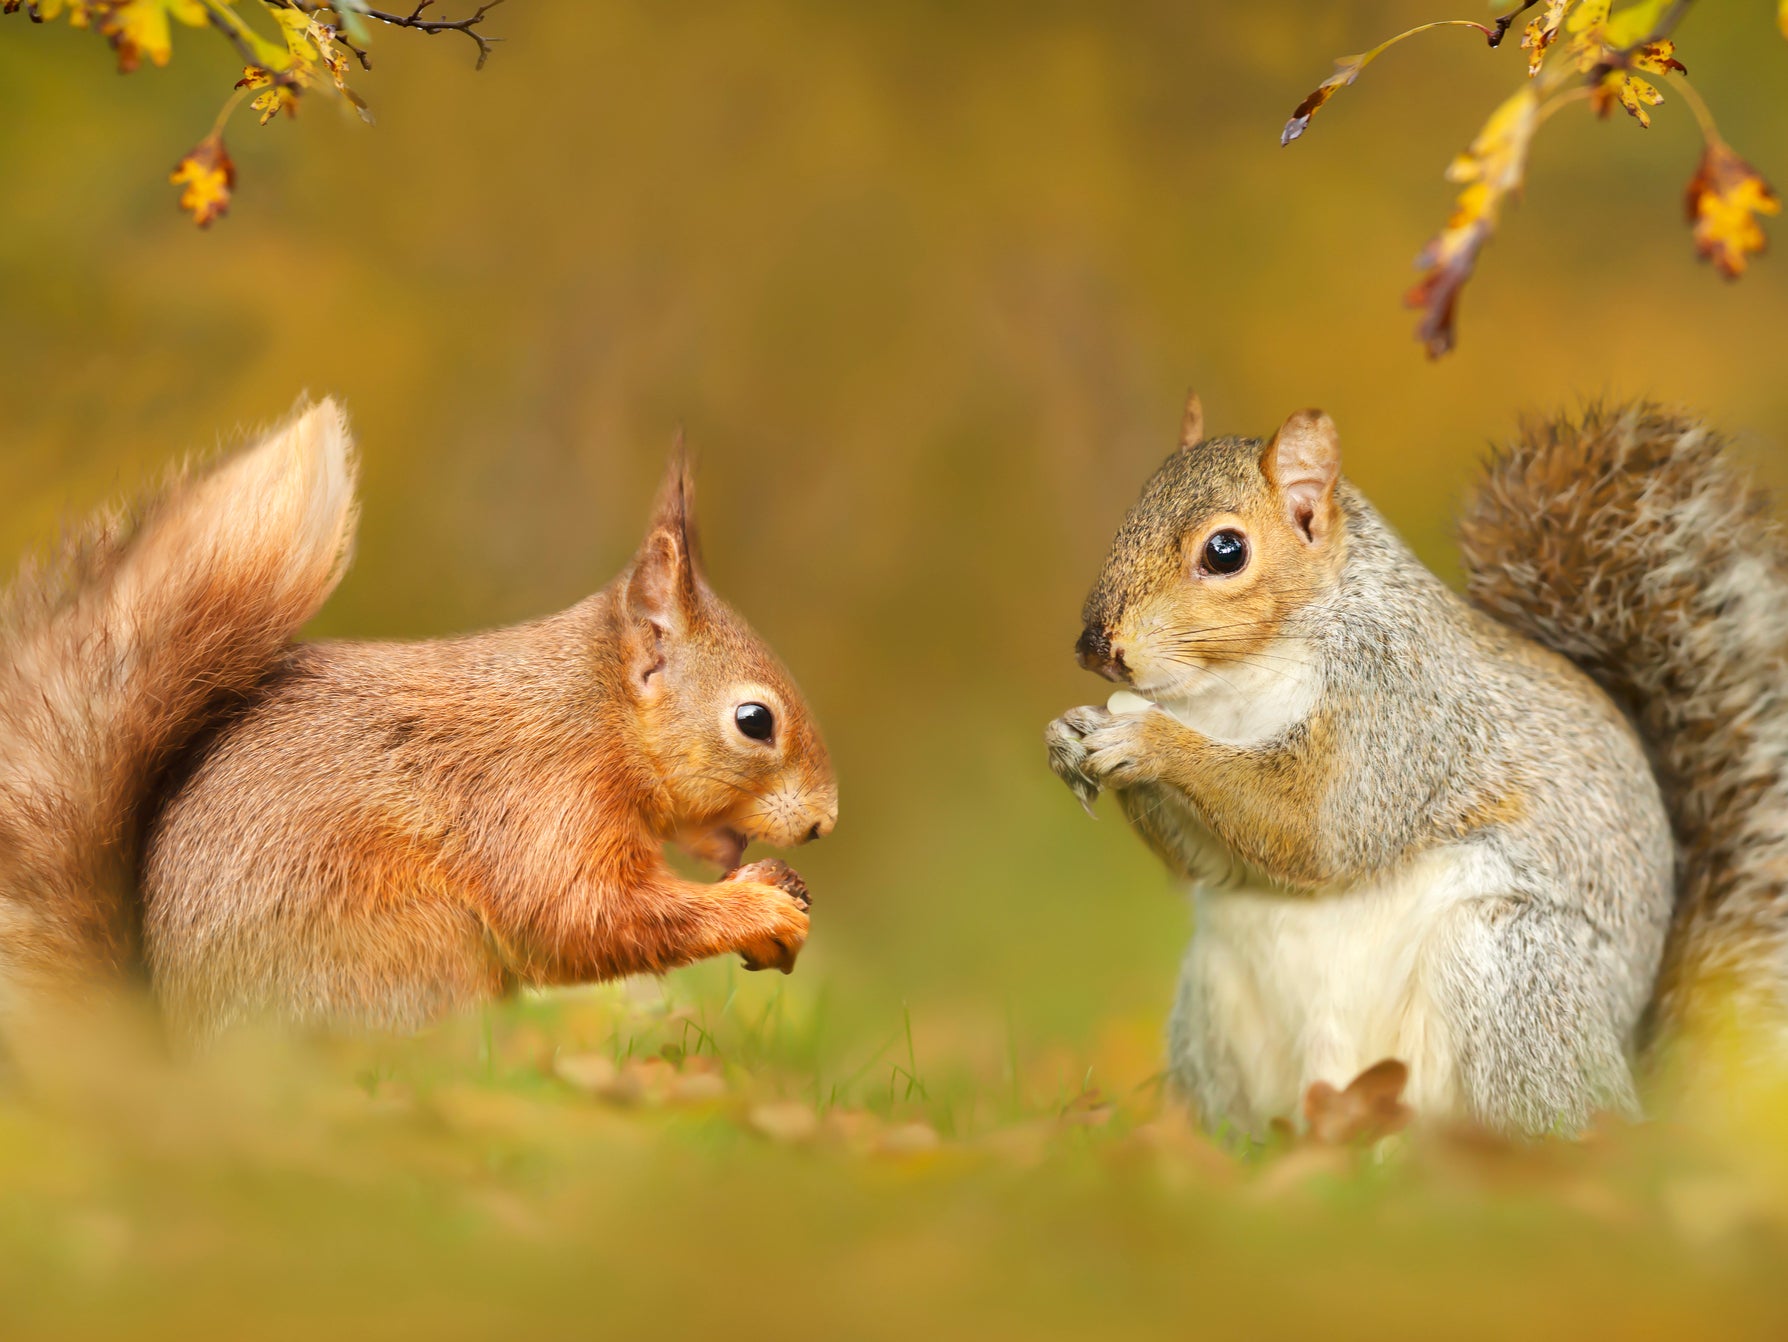 Grey squirrels pass on the fatal ‘squirrel pox’ to red squirrels